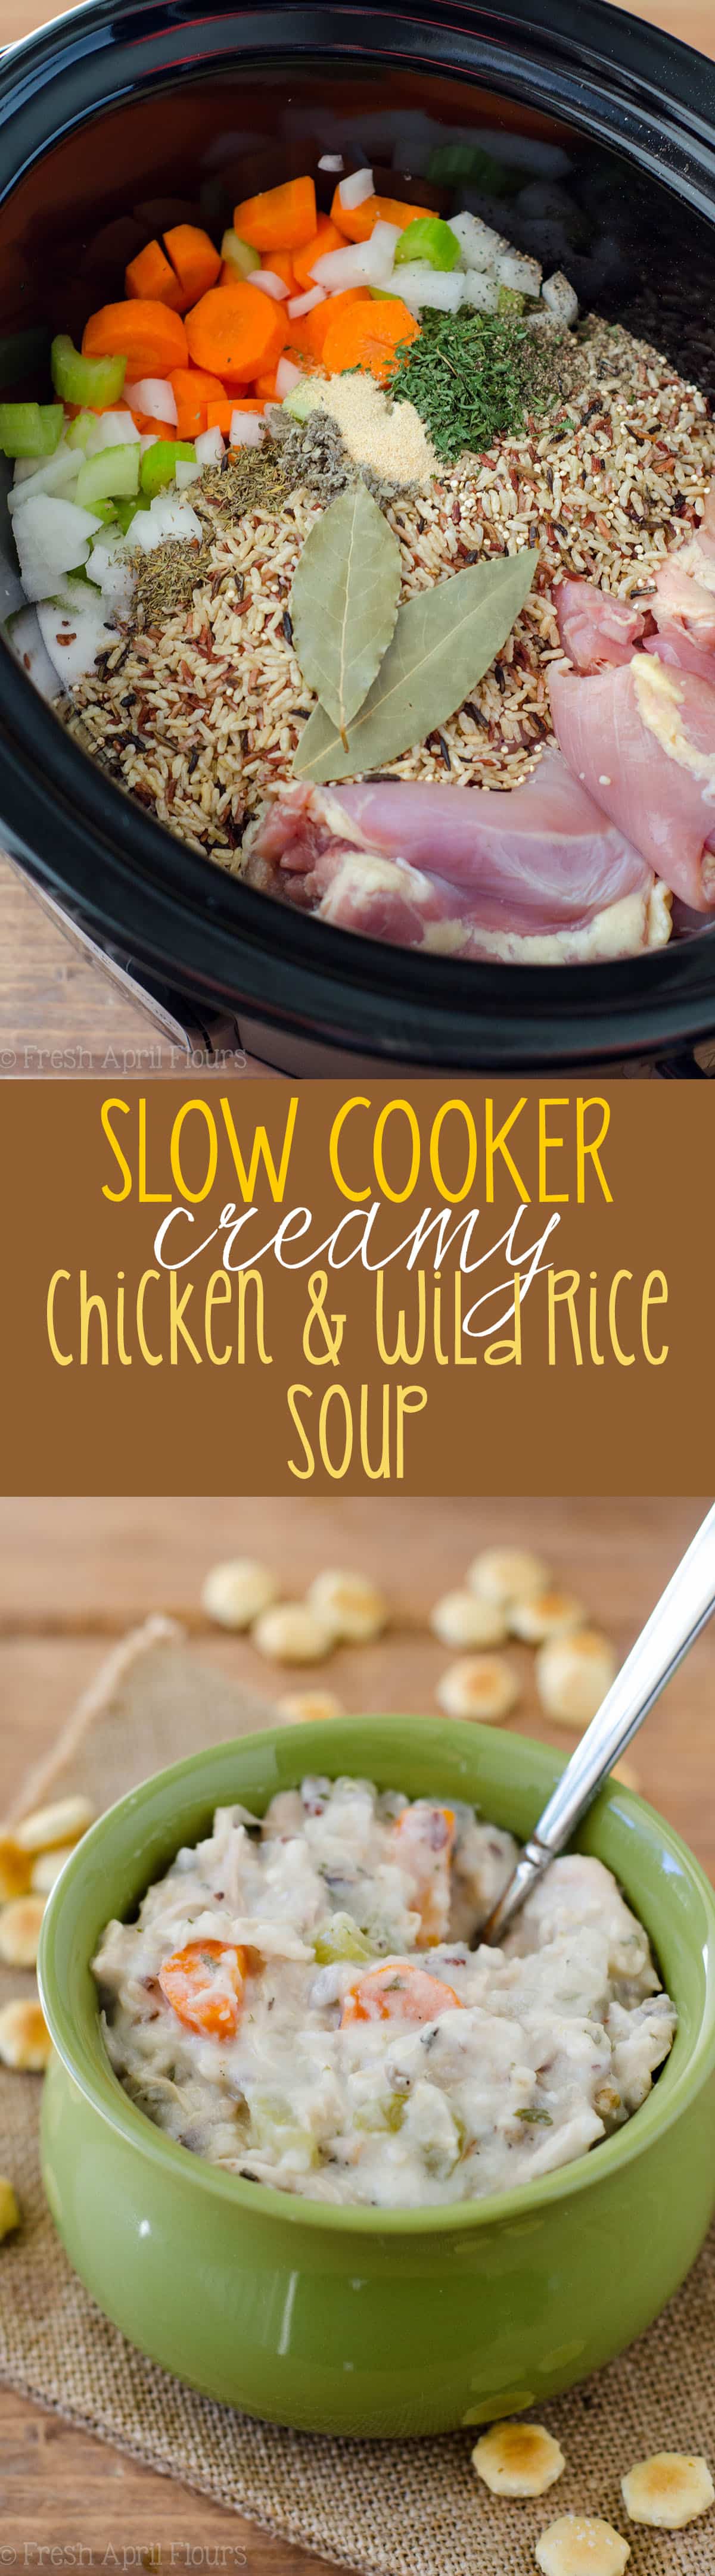 Slow Cooker Creamy Chicken and Wild Rice Soup: An easy set-it-and-forget-it recipe for creamy chicken and wild rice soup for the slow cooker. Perfect for cold weather and freezing for on-hand meals. via @frshaprilflours